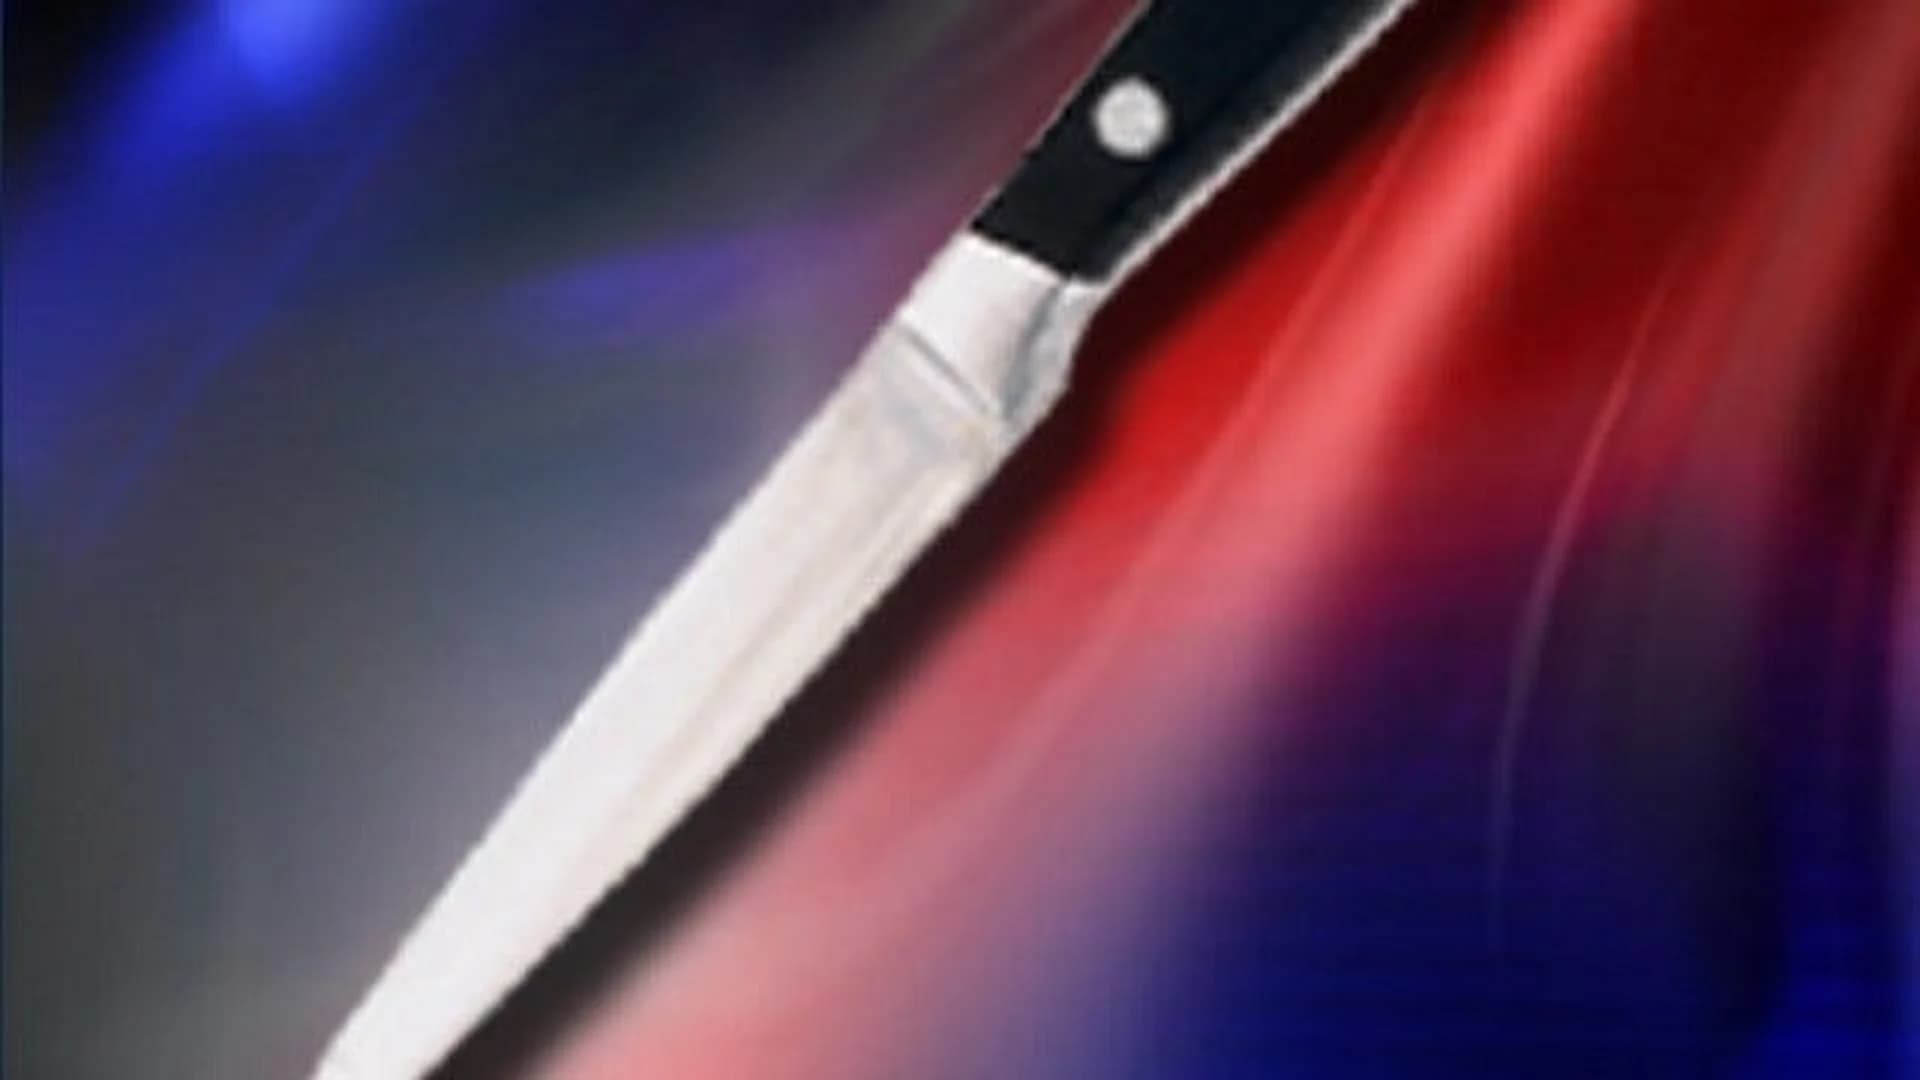 Man convicted of killing roommate with steak knife over rent